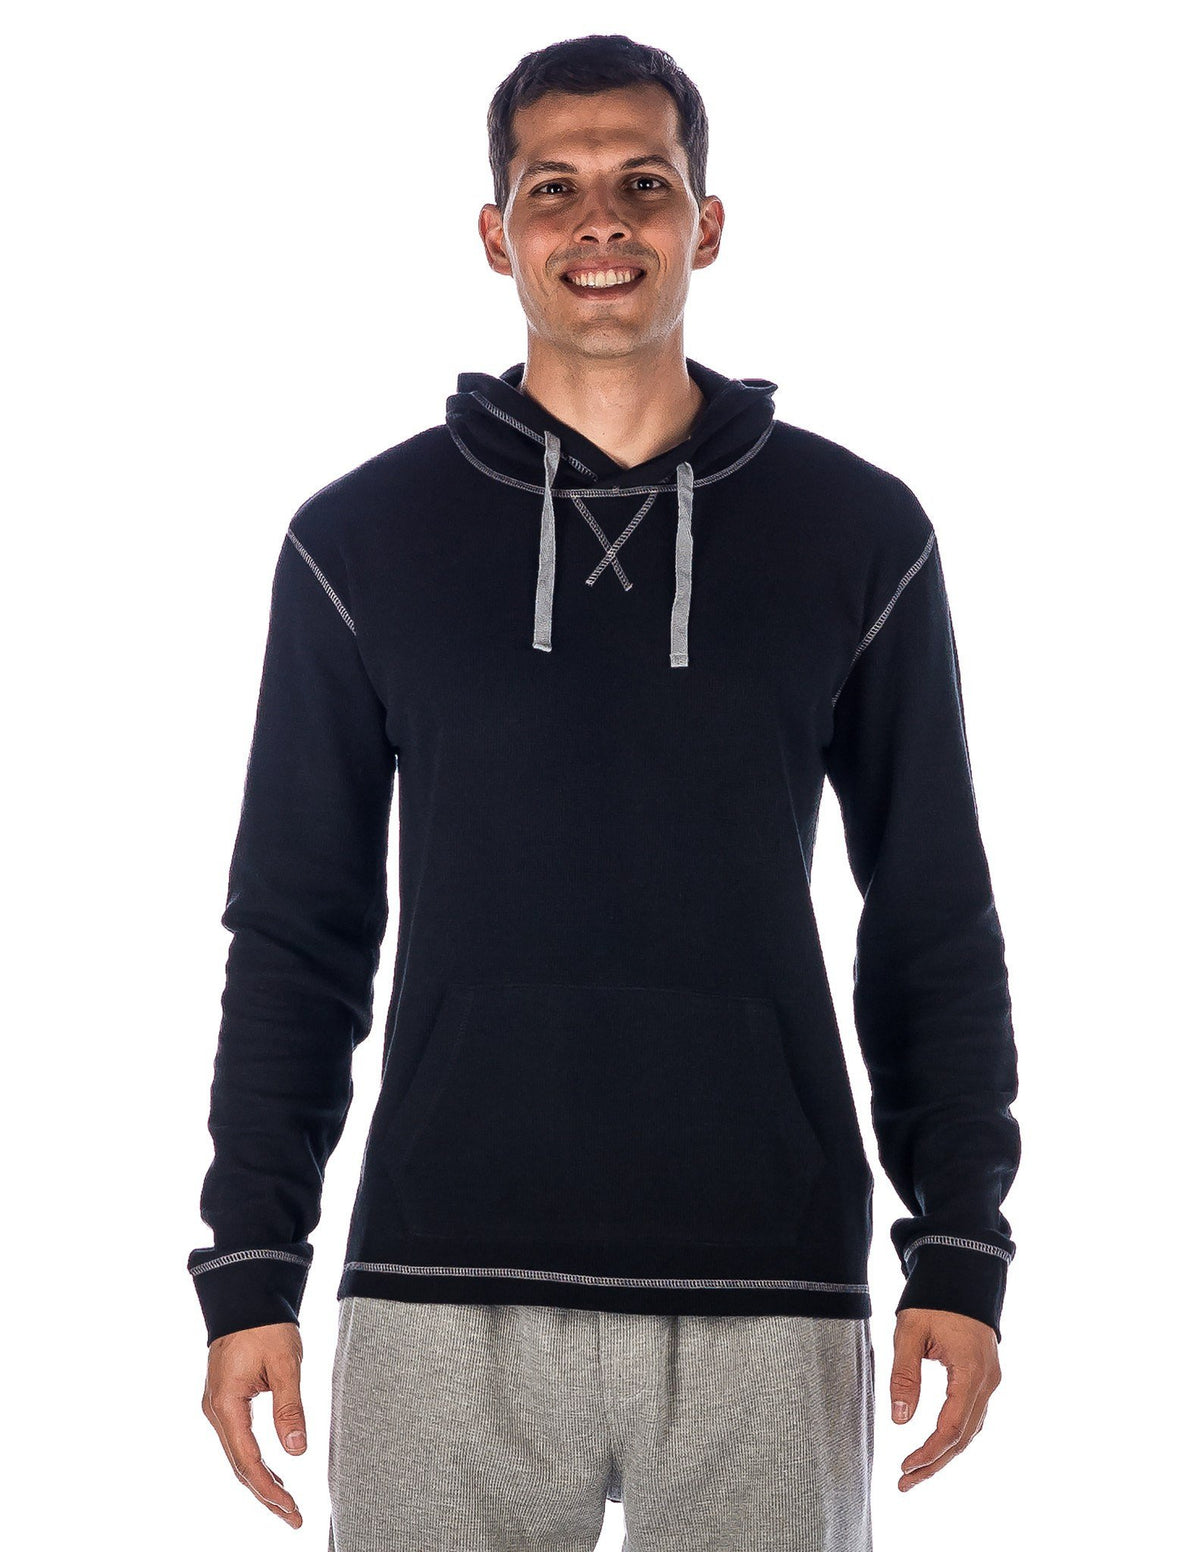 Men's Solid Thermal Lounge Hoodie - with Contrast Stitching - Black